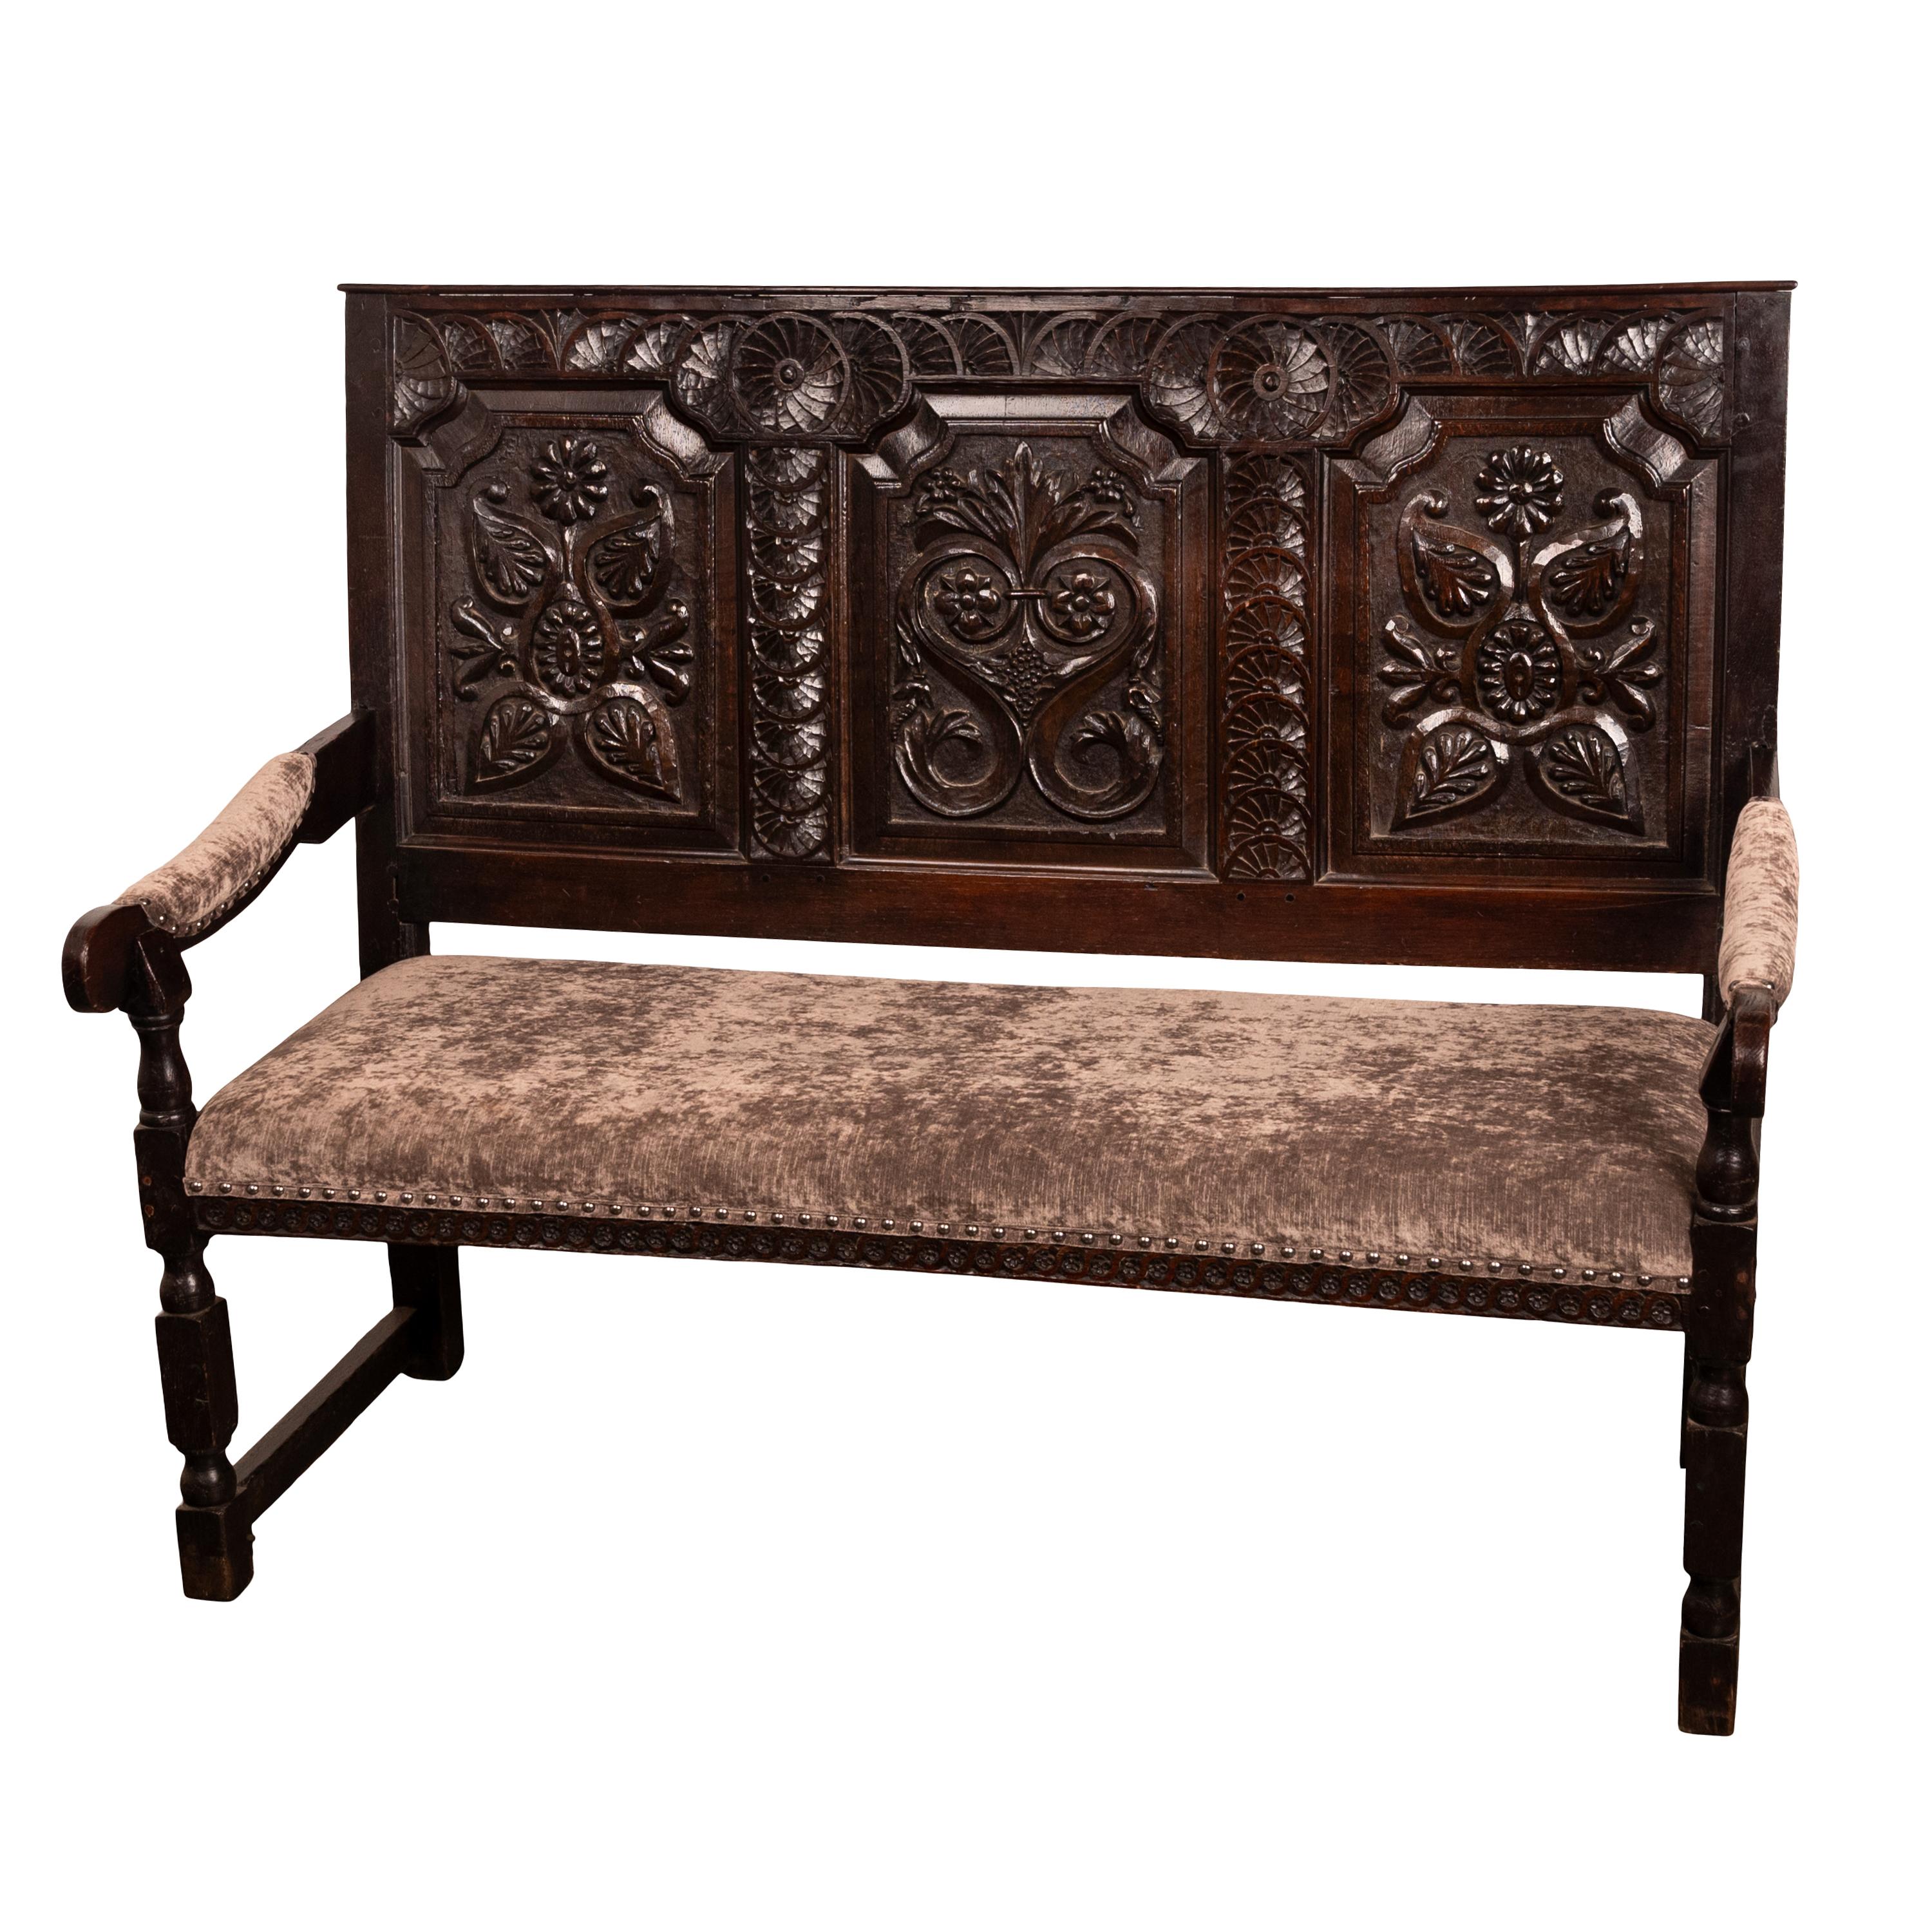 Antique English 17th Century King Charles II Carved Oak Settle Sofa Bench 1680 For Sale 1